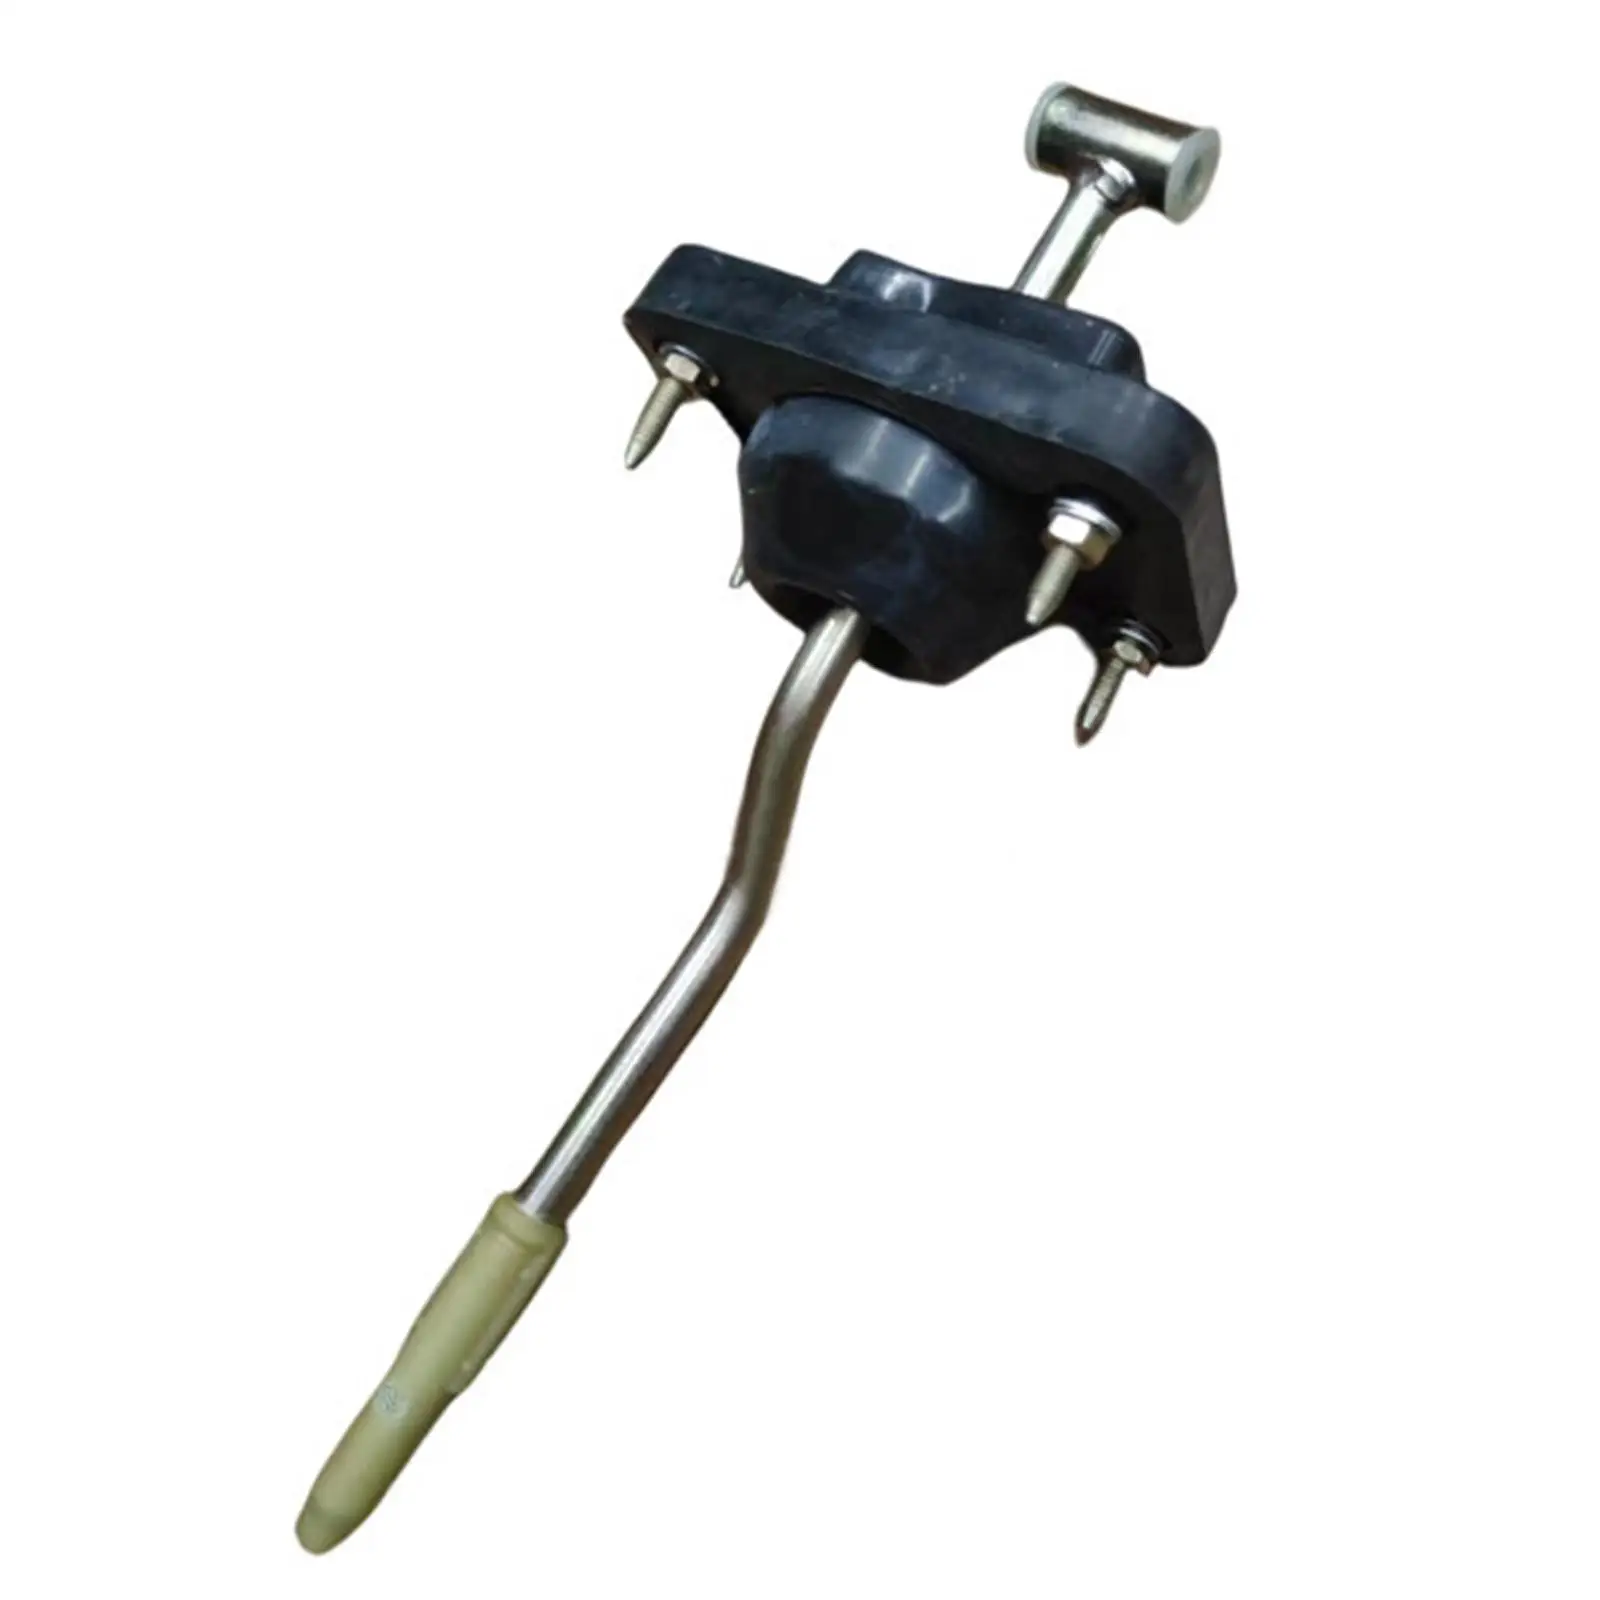 Gear Shift Lever Assembly Auto Accessories Replaces 2400H3 for Peugeot 206 207 Stable Performance Easy Installation